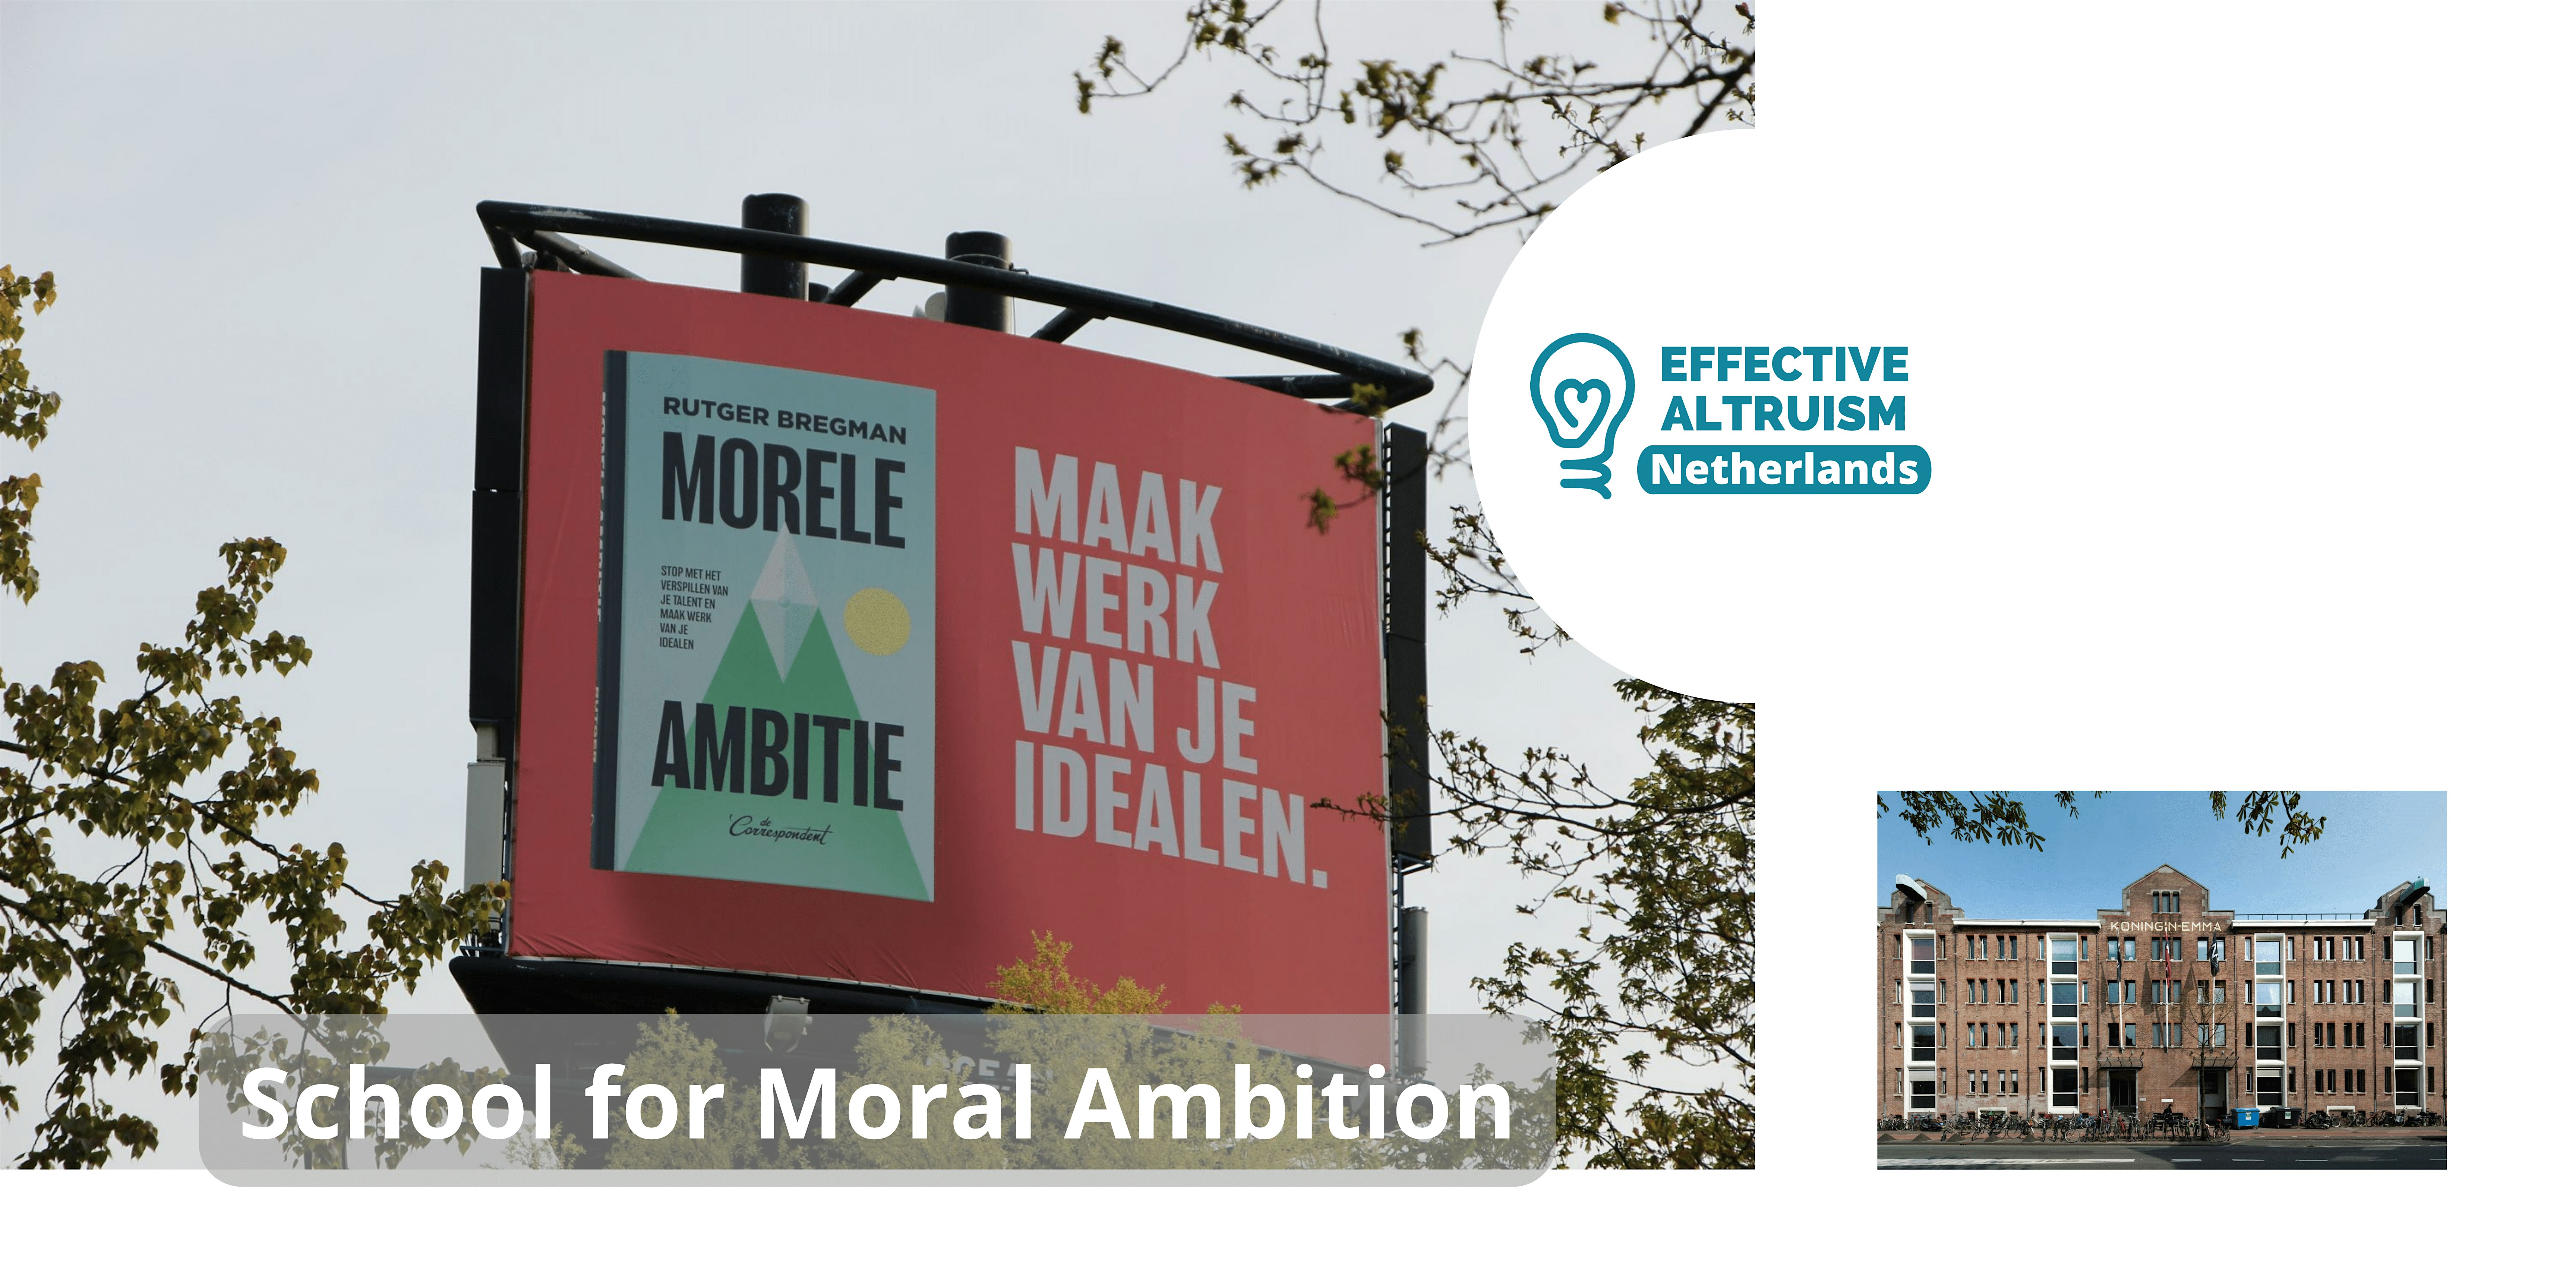 Behind the scenes of the School for Moral Ambition